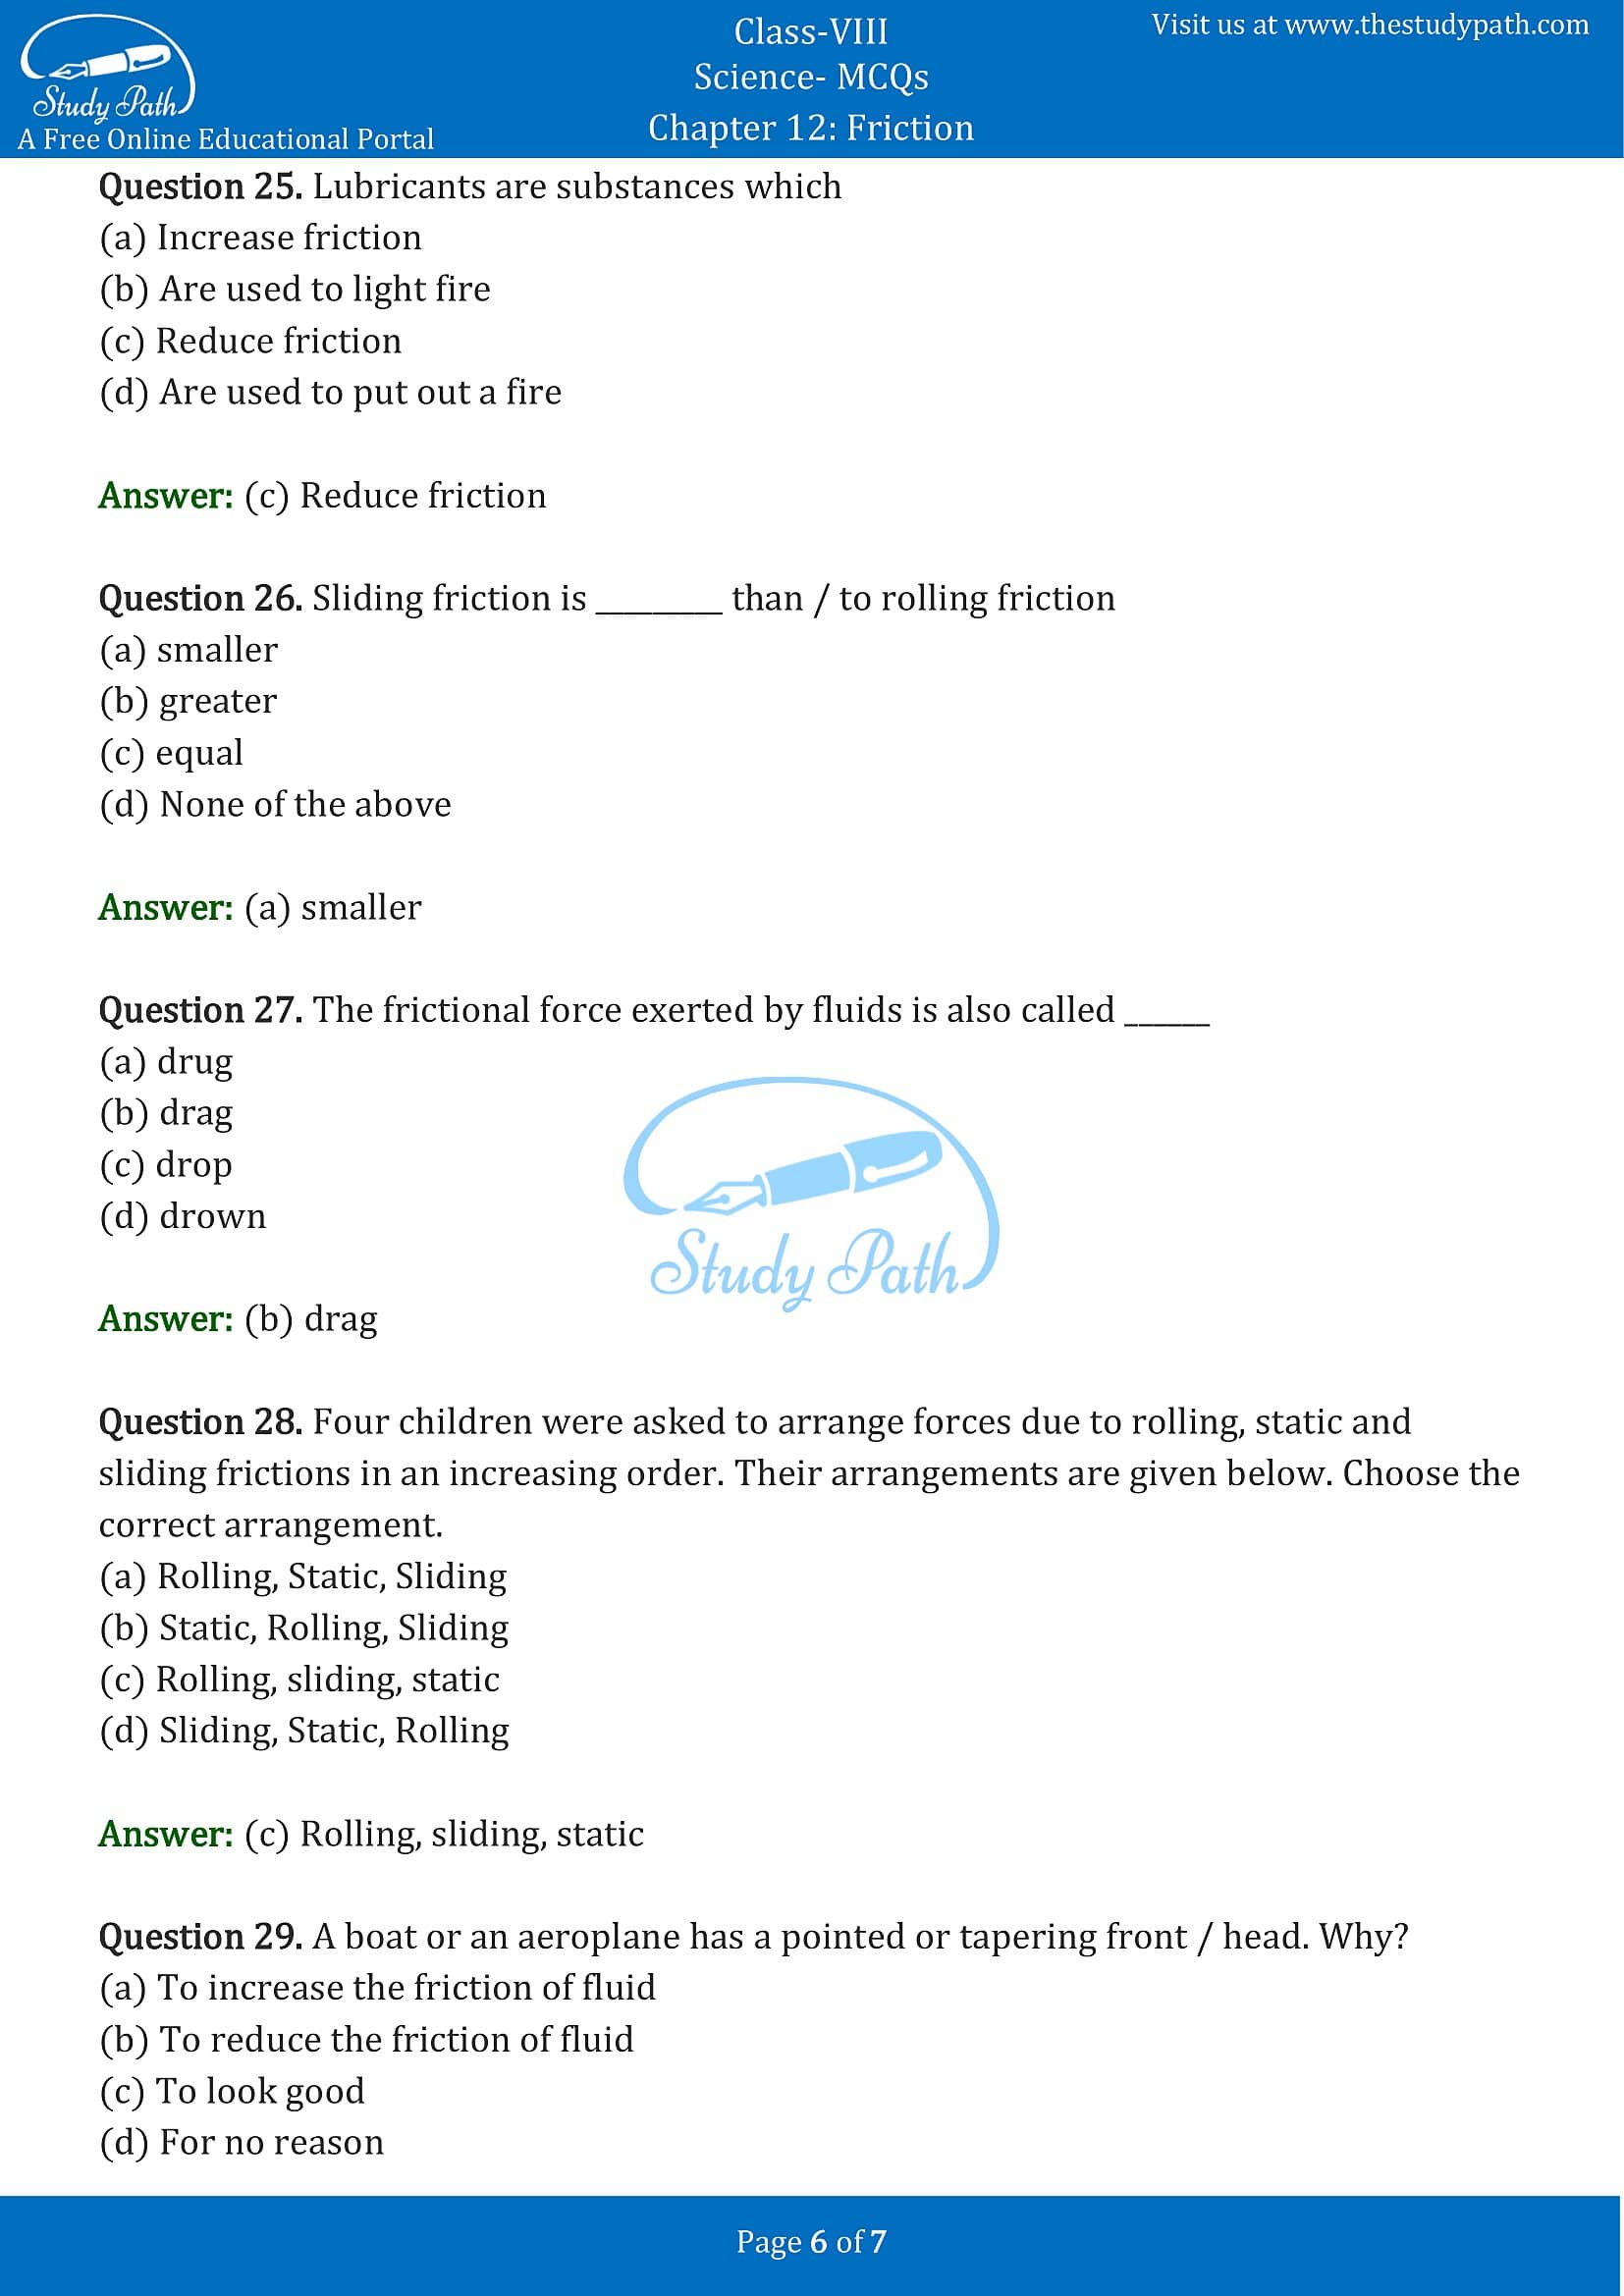 MCQ Questions for Class 8 Science Chapter 12 Friction with Answers PDF -6